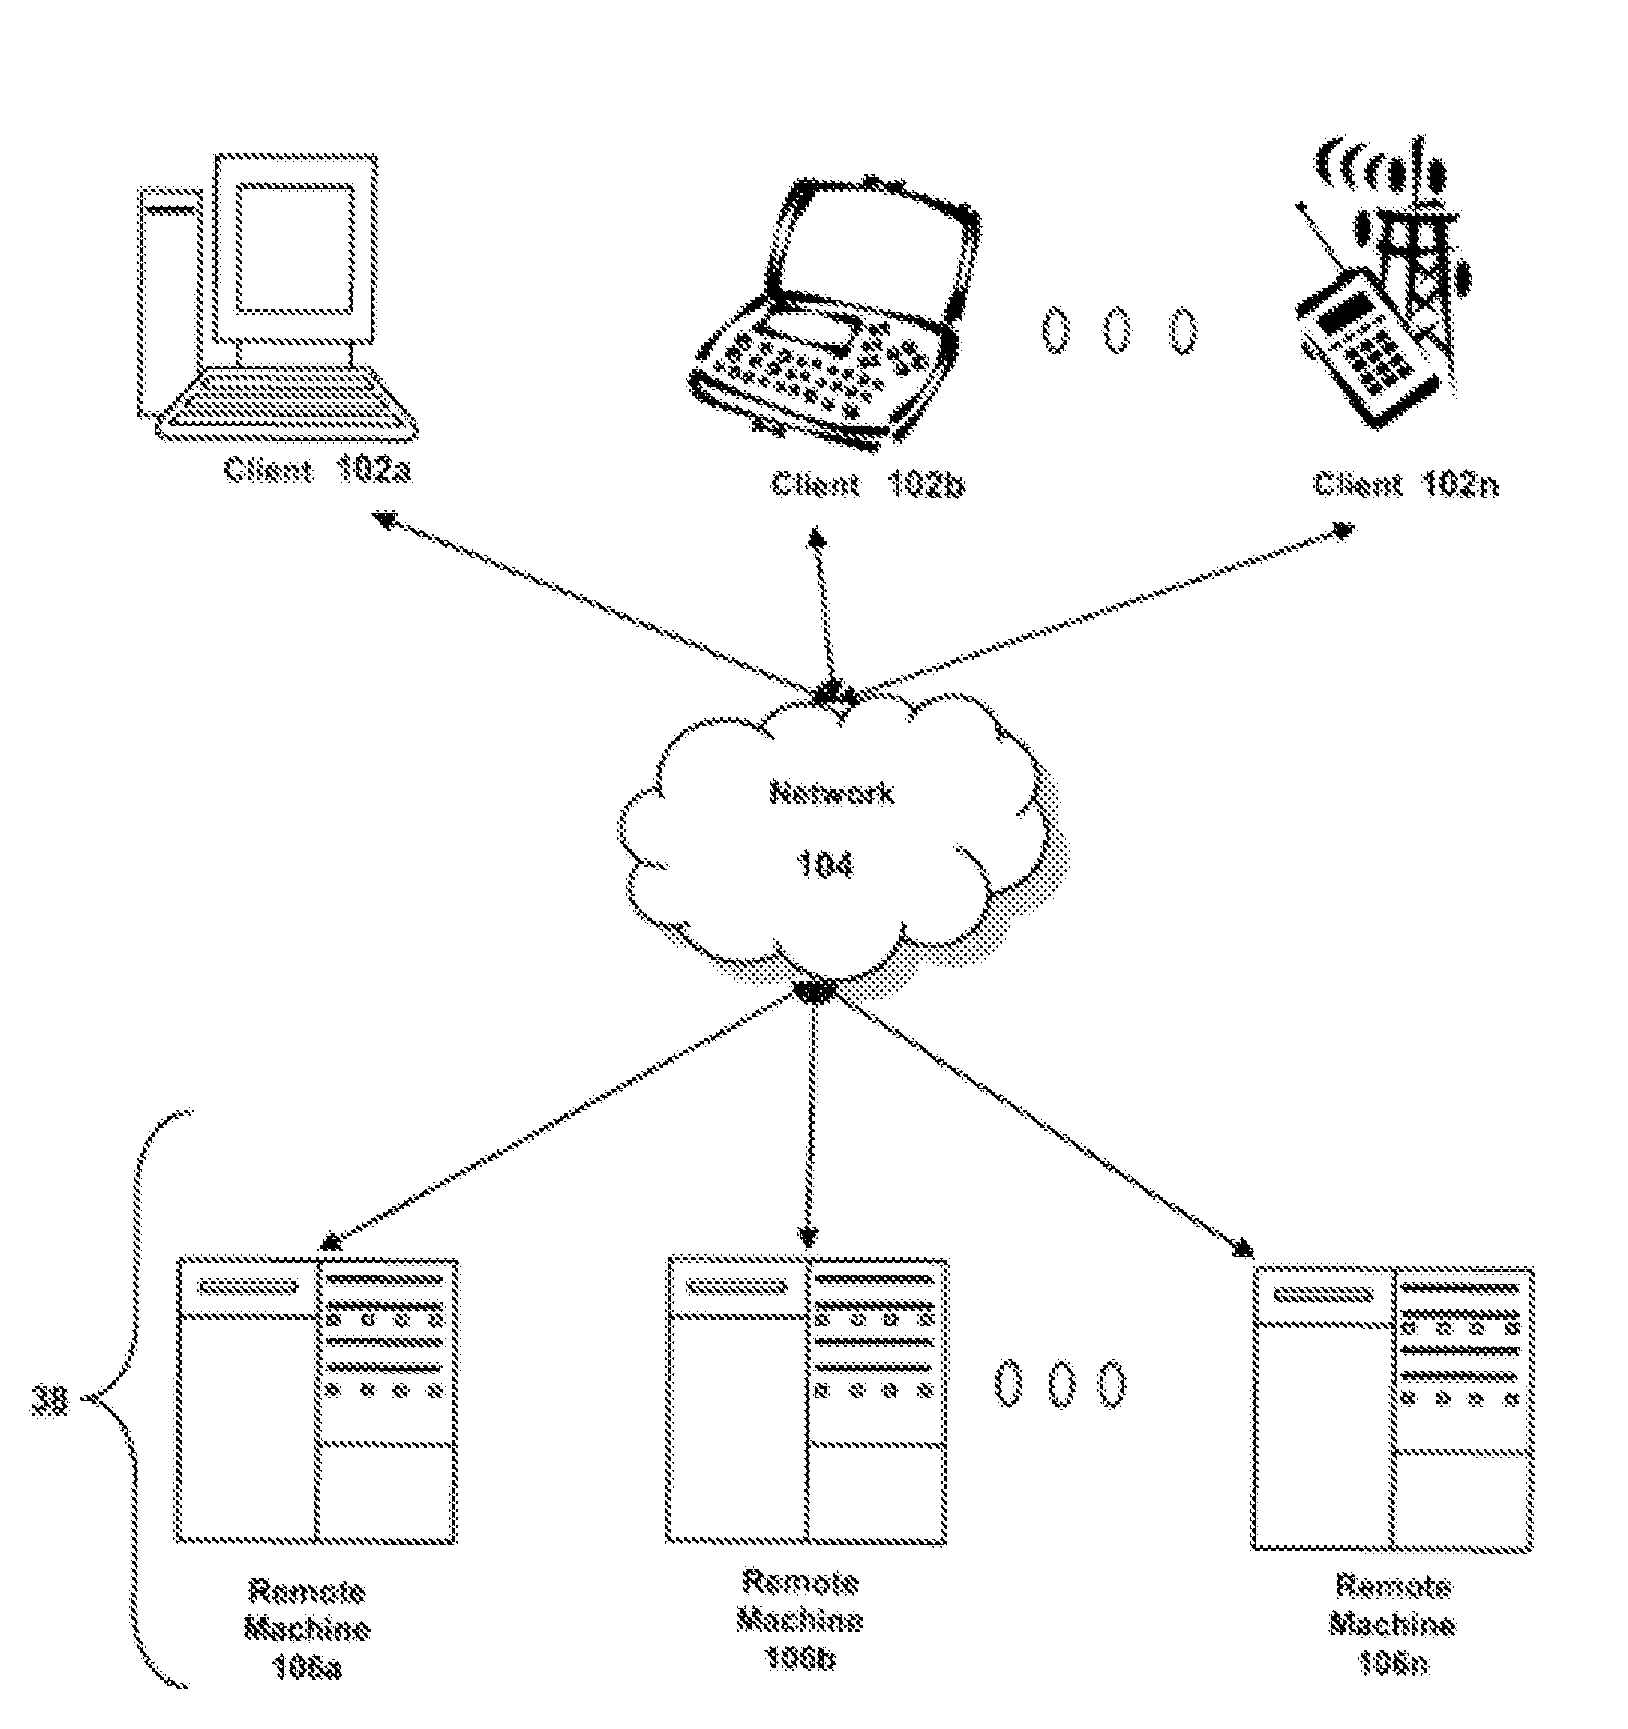 Transparent user interface integration between local and remote computing environments